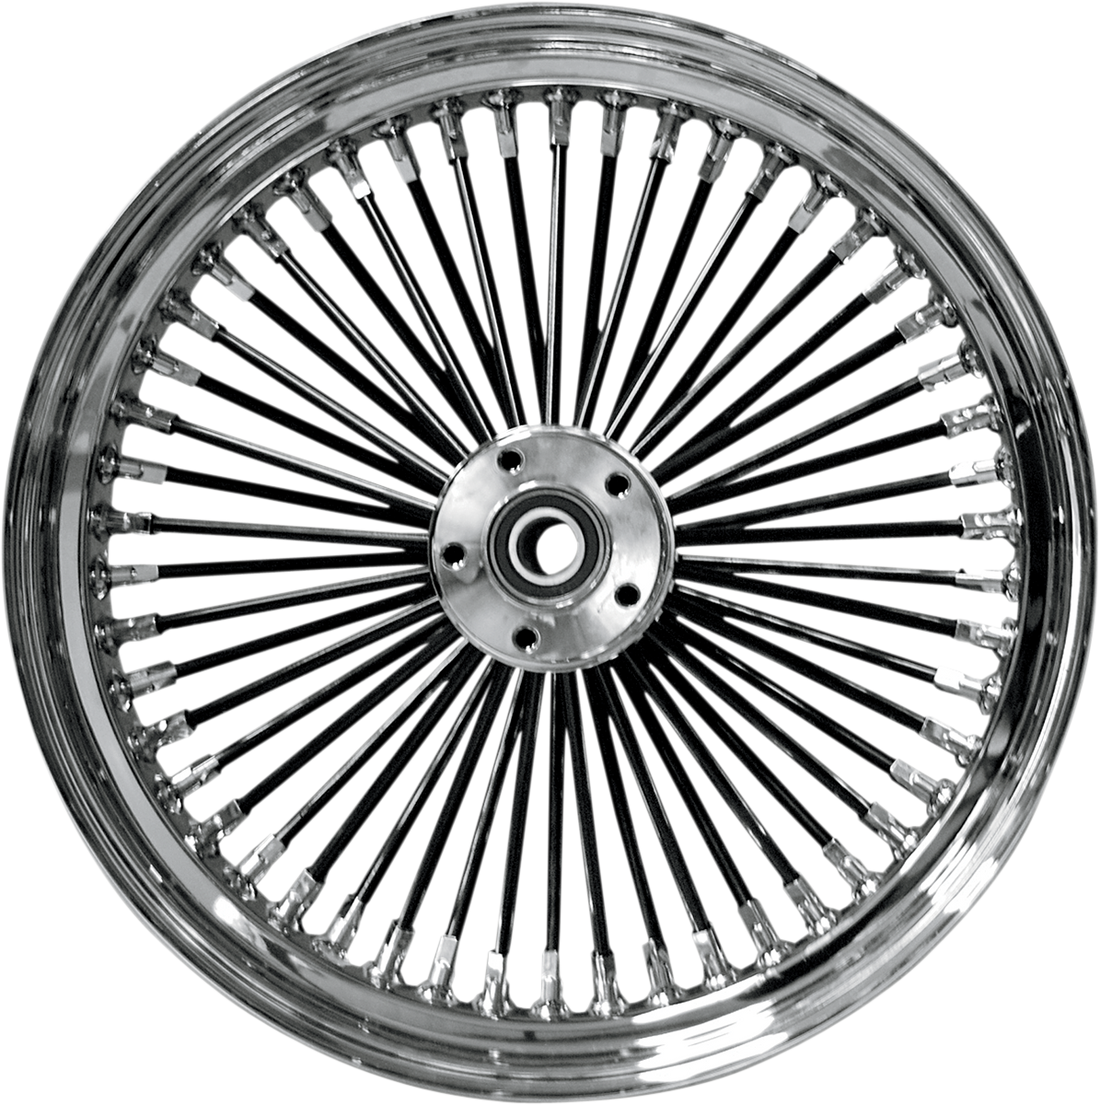 DRAG SPECIALTIES Front Wheel - Dual Disc/No ABS - Black Chrome - 21"x3.50" - '08-'19 04235-2024-08BS